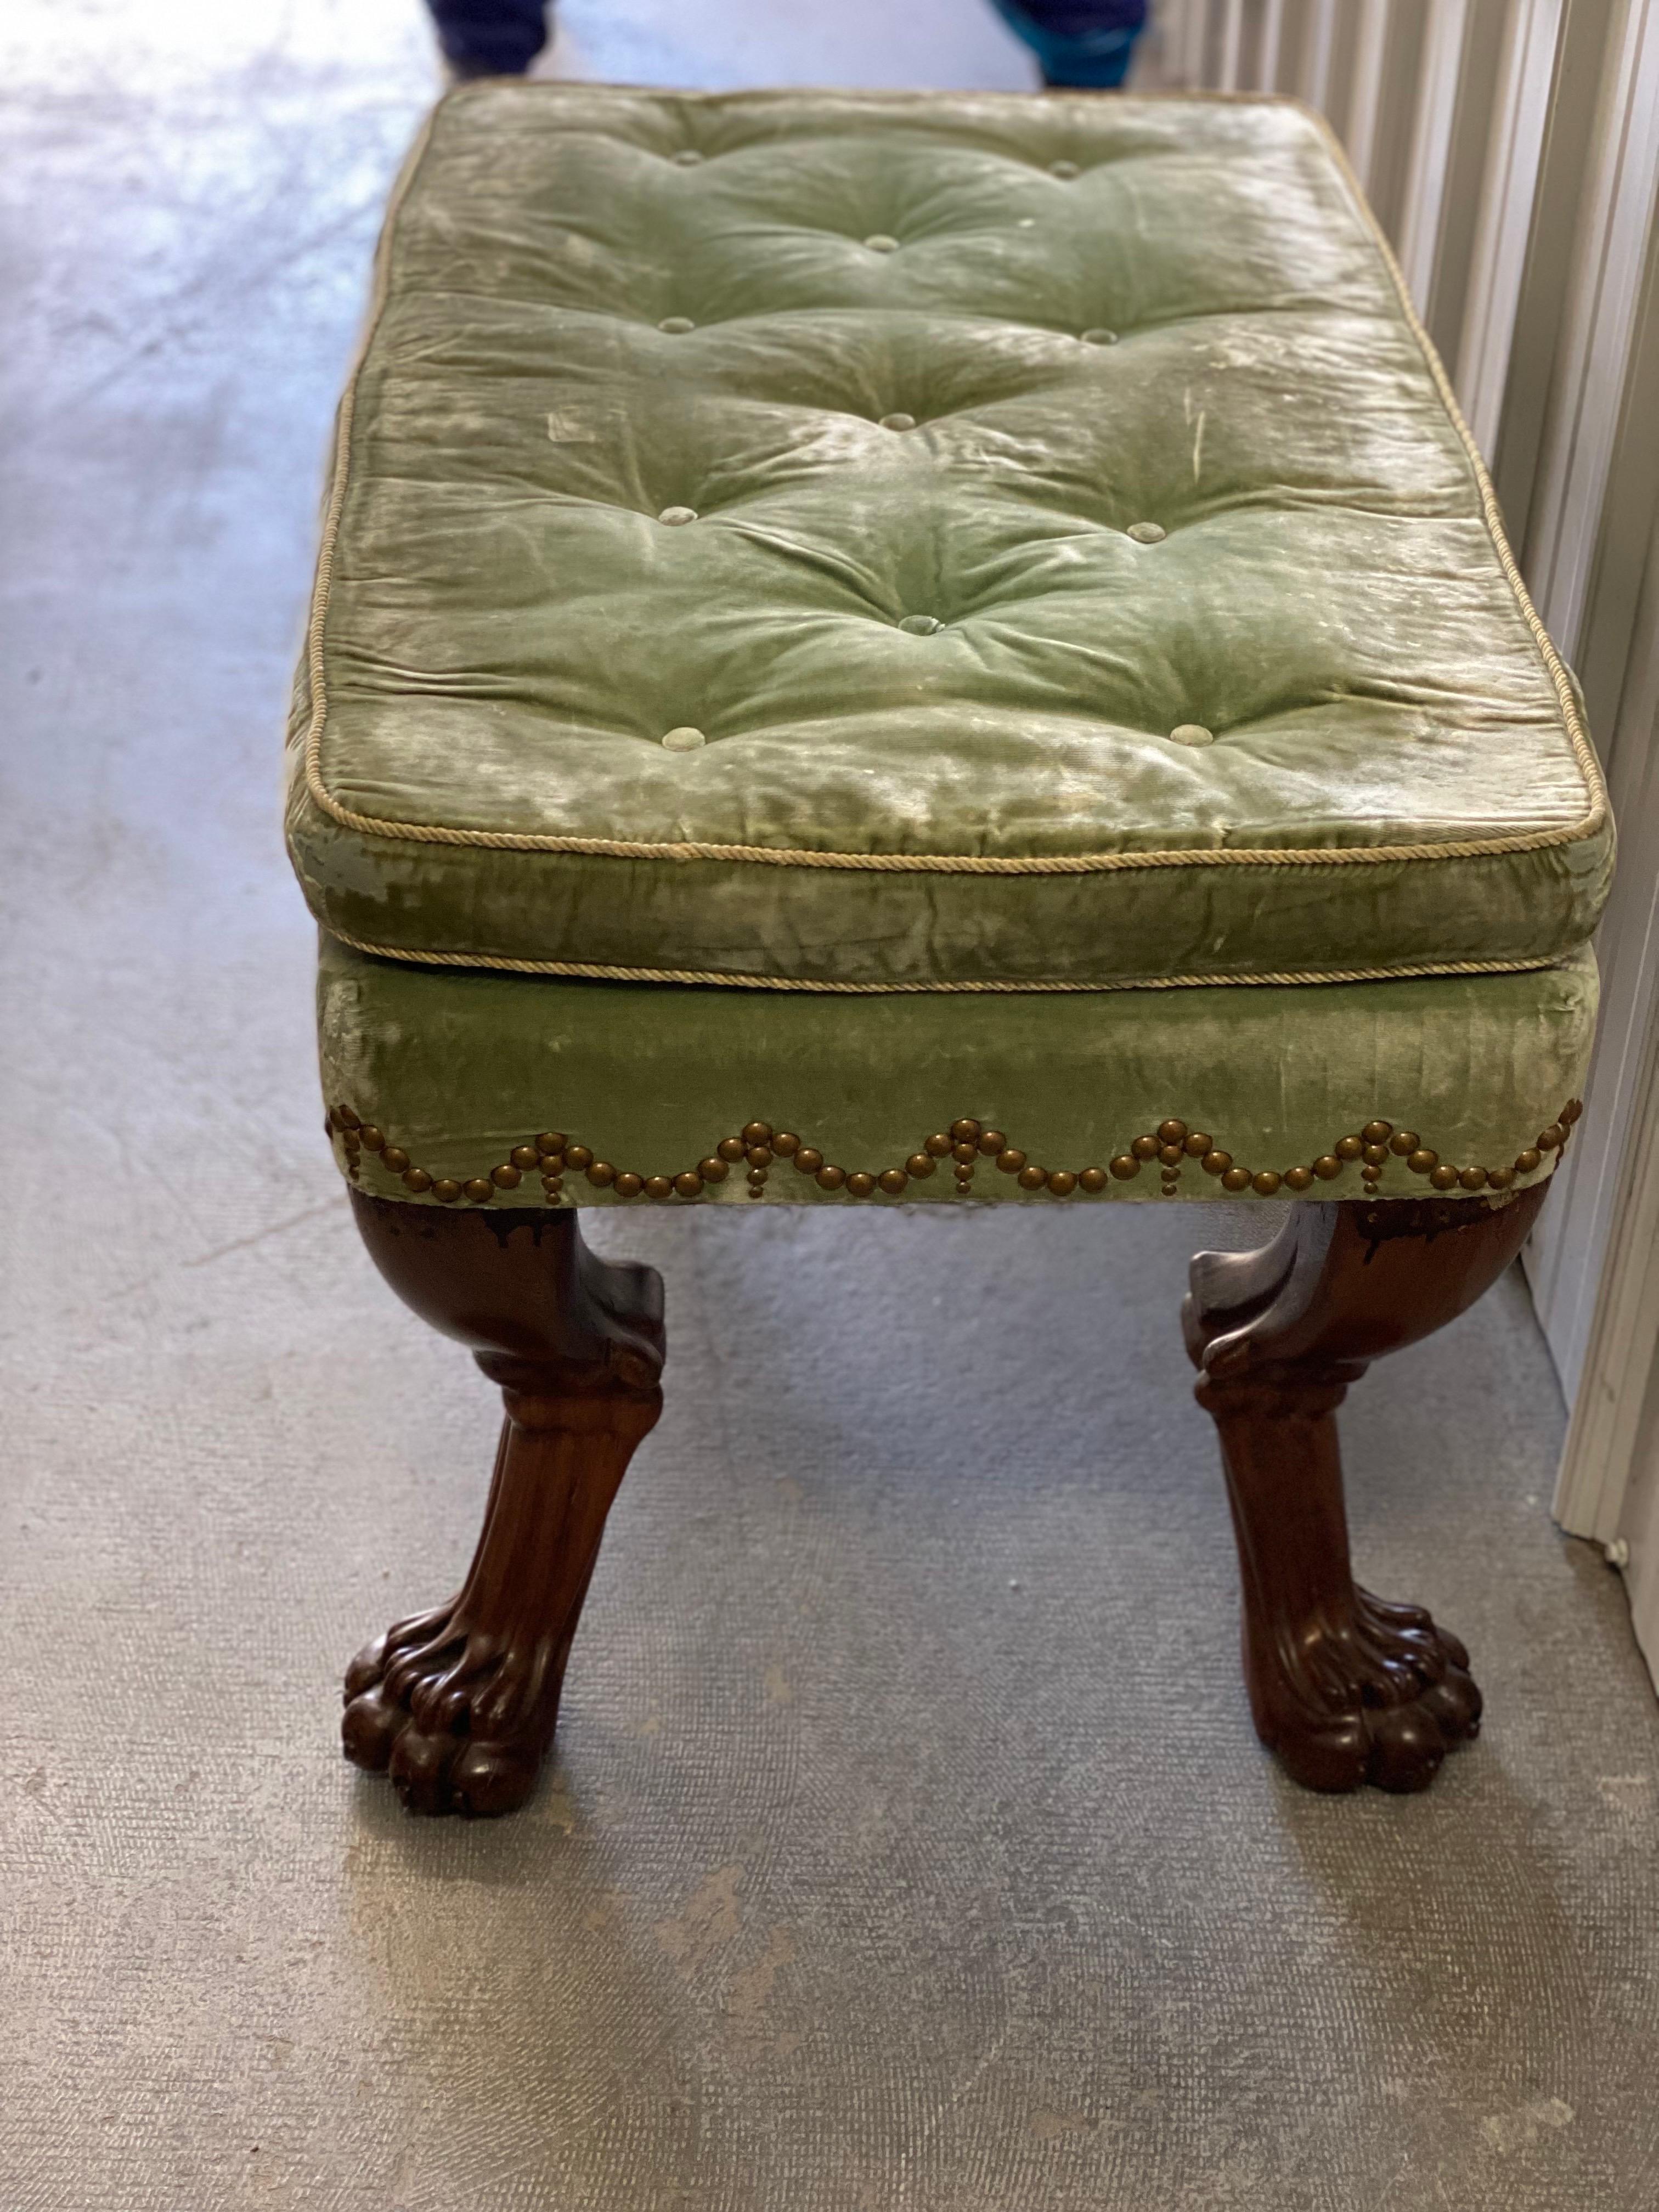 18th Century English Mahogany Clawfoot Stool in Velvet with Nailheads For Sale 2